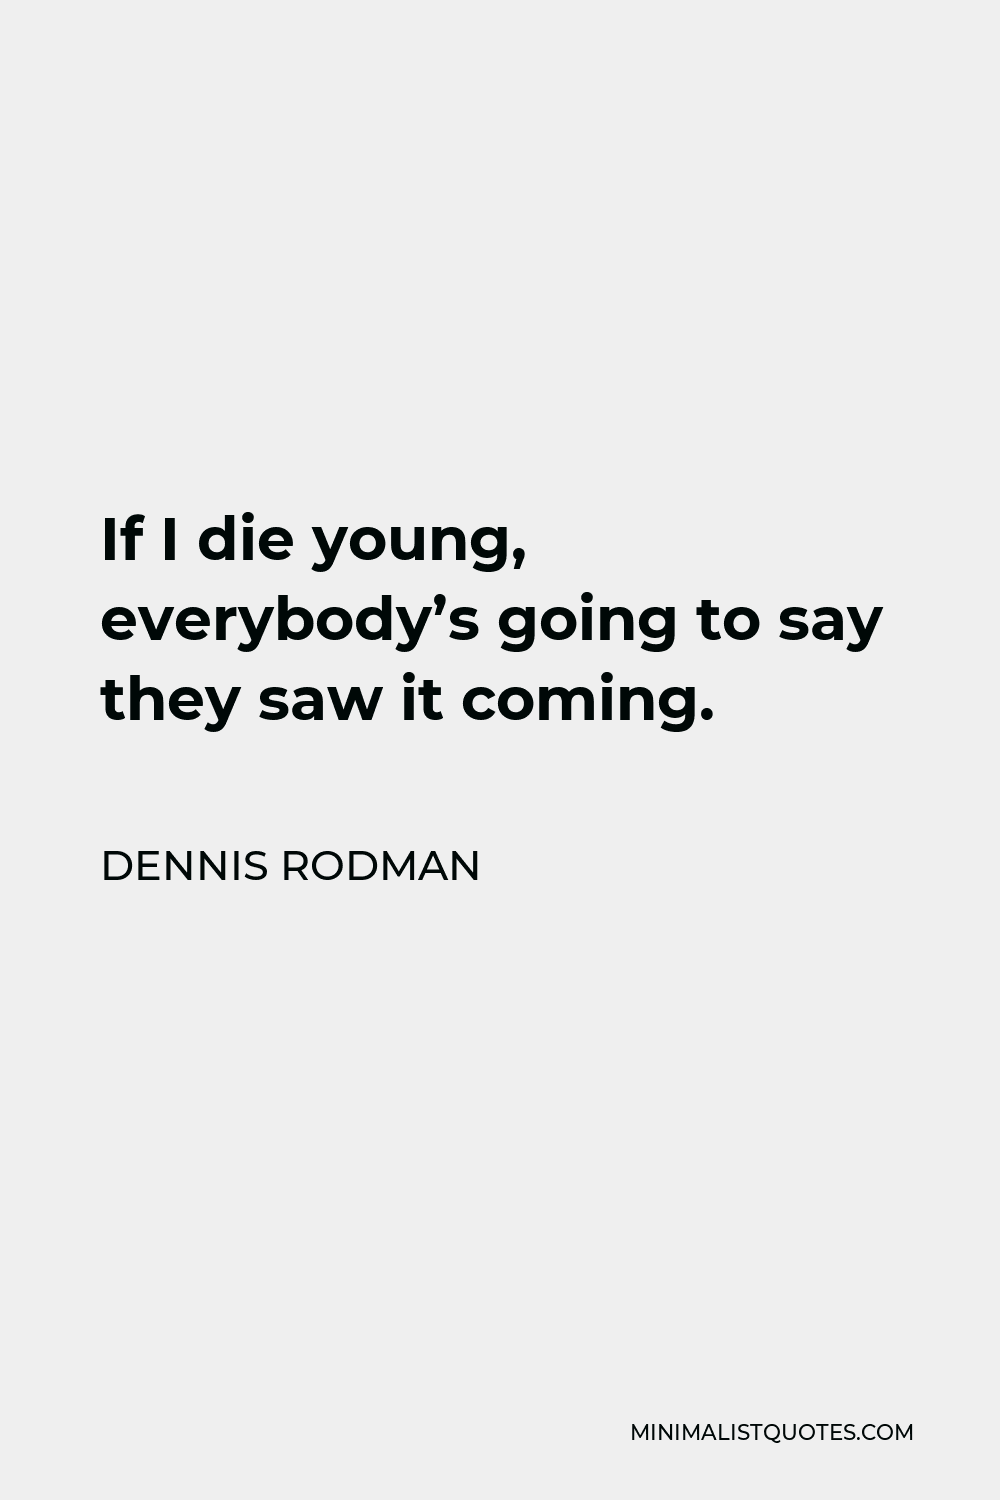 Dennis Rodman Quote - If I die young, everybody’s going to say they saw it coming.